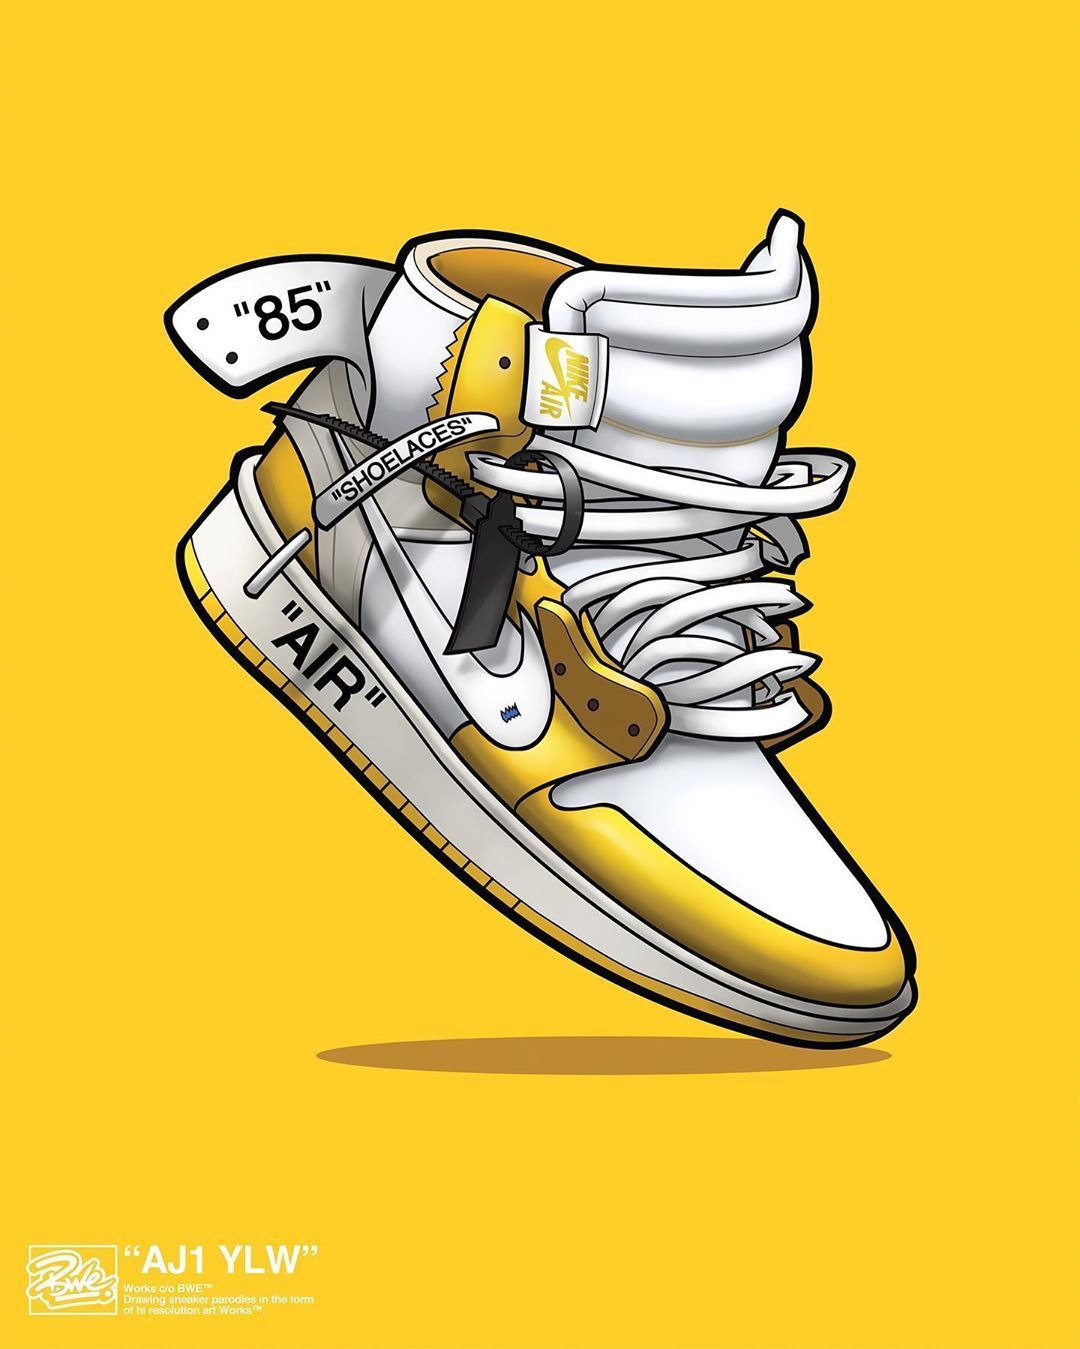 BWE on Instagram: “BWE Illustrated Off White X Air Jordan 1 (yellow) poster. Available exclusively. Shoes wallpaper, Sneakers illustration, Jordan shoes wallpaper